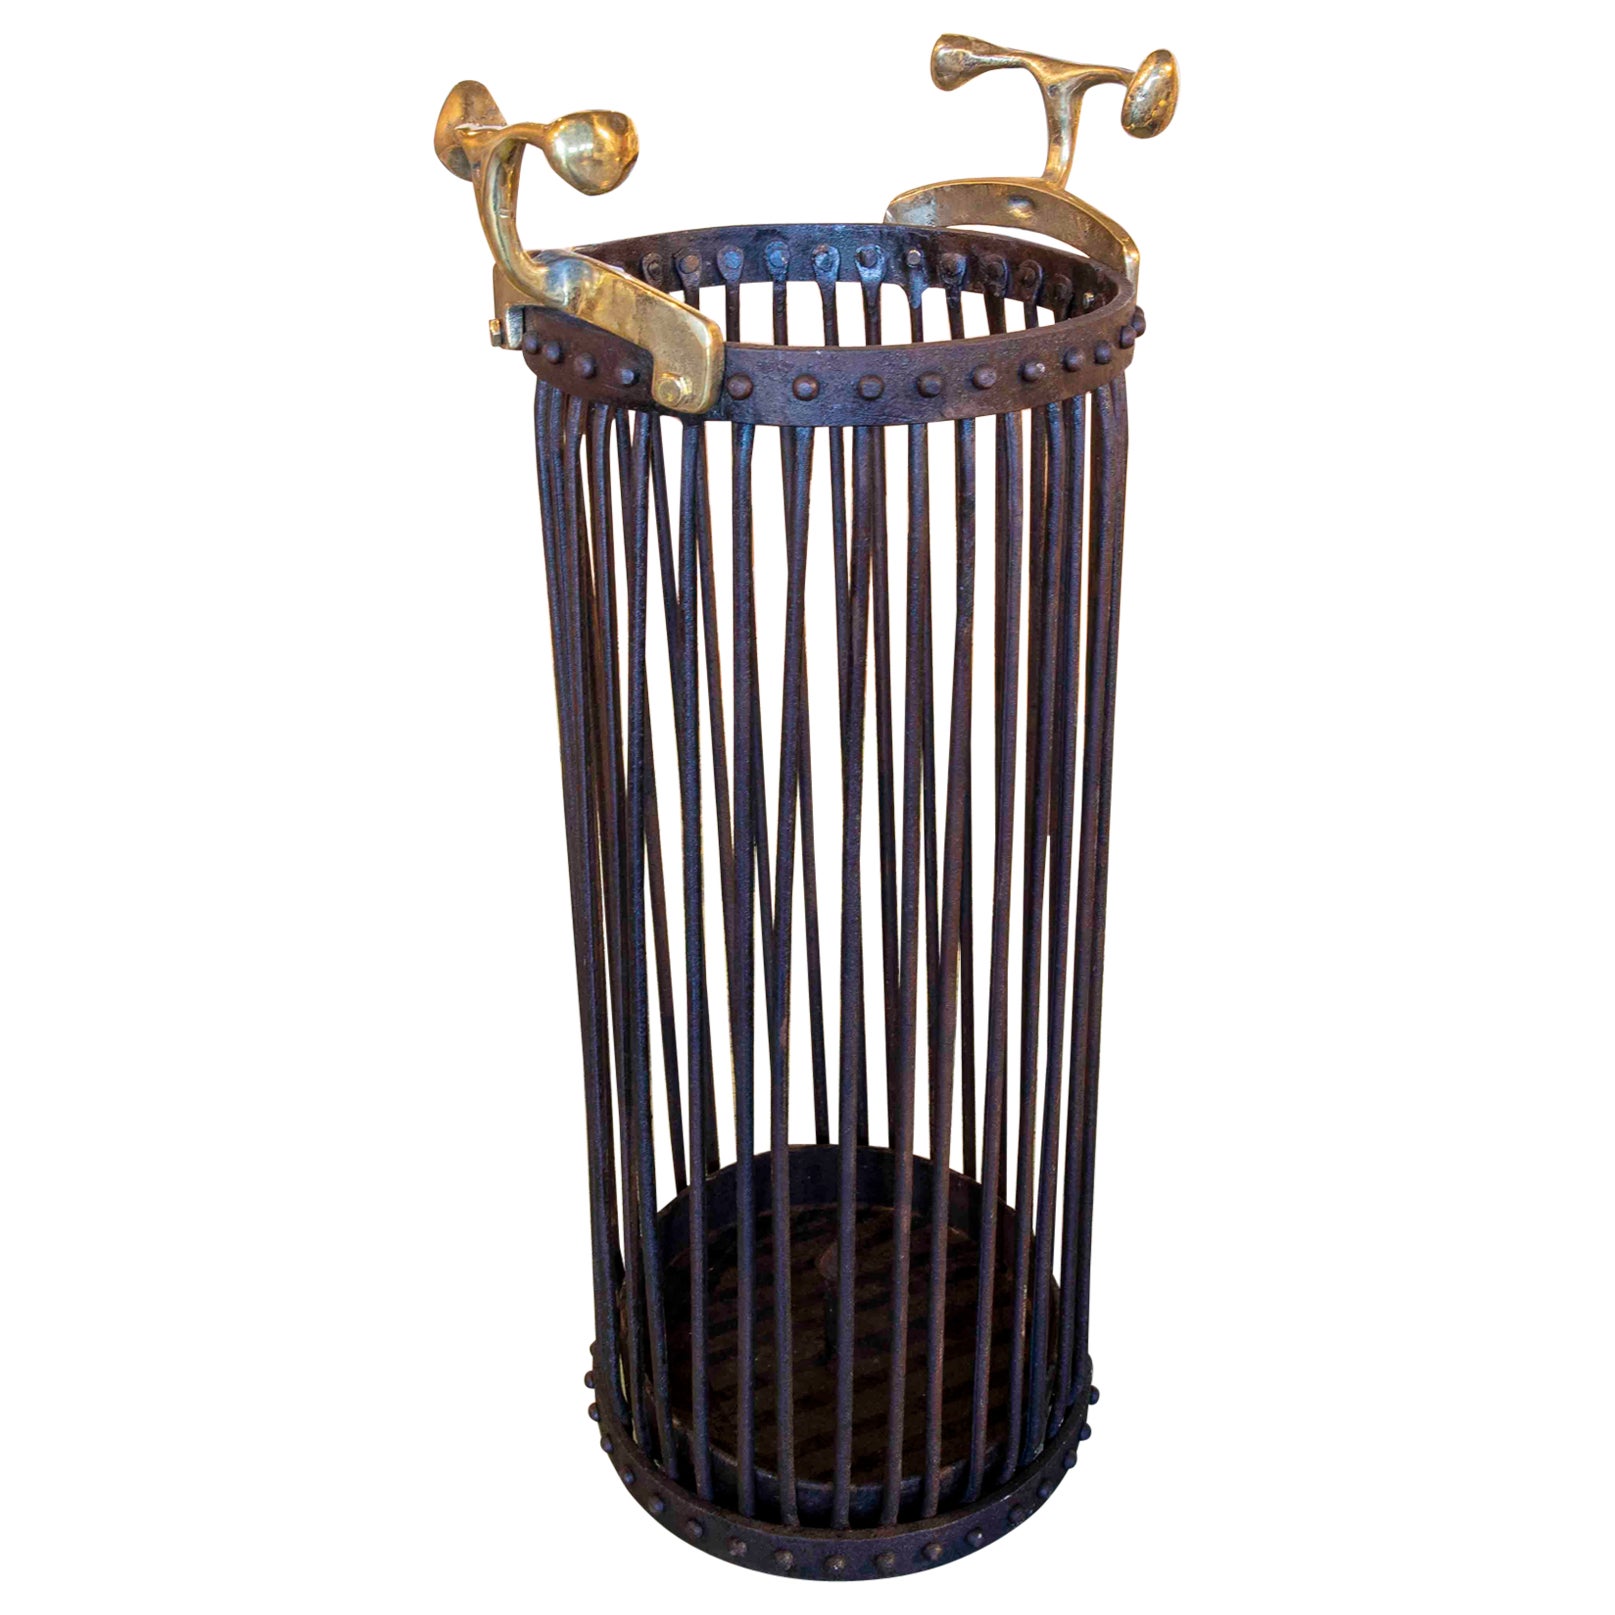  The 1980s Iron Umbrella Stand with Bronze Handles by the Artist David Marshall